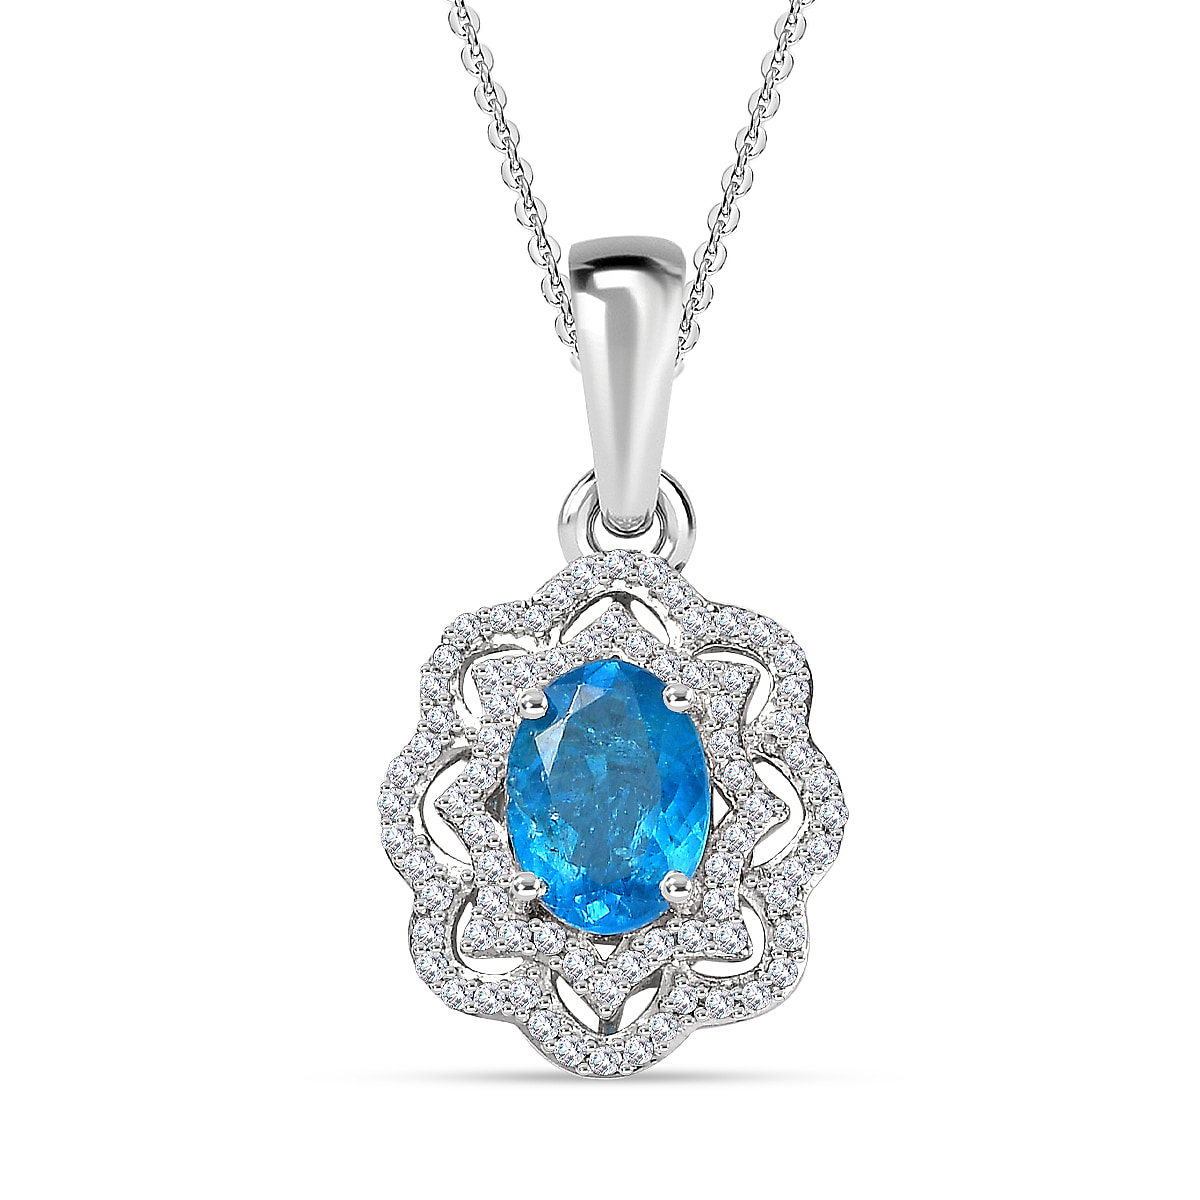 Neon Apatite & Natural Zircon Pendant with Chain (Size 20) in Platinum Overlay Sterling Silver 2.06 Ct